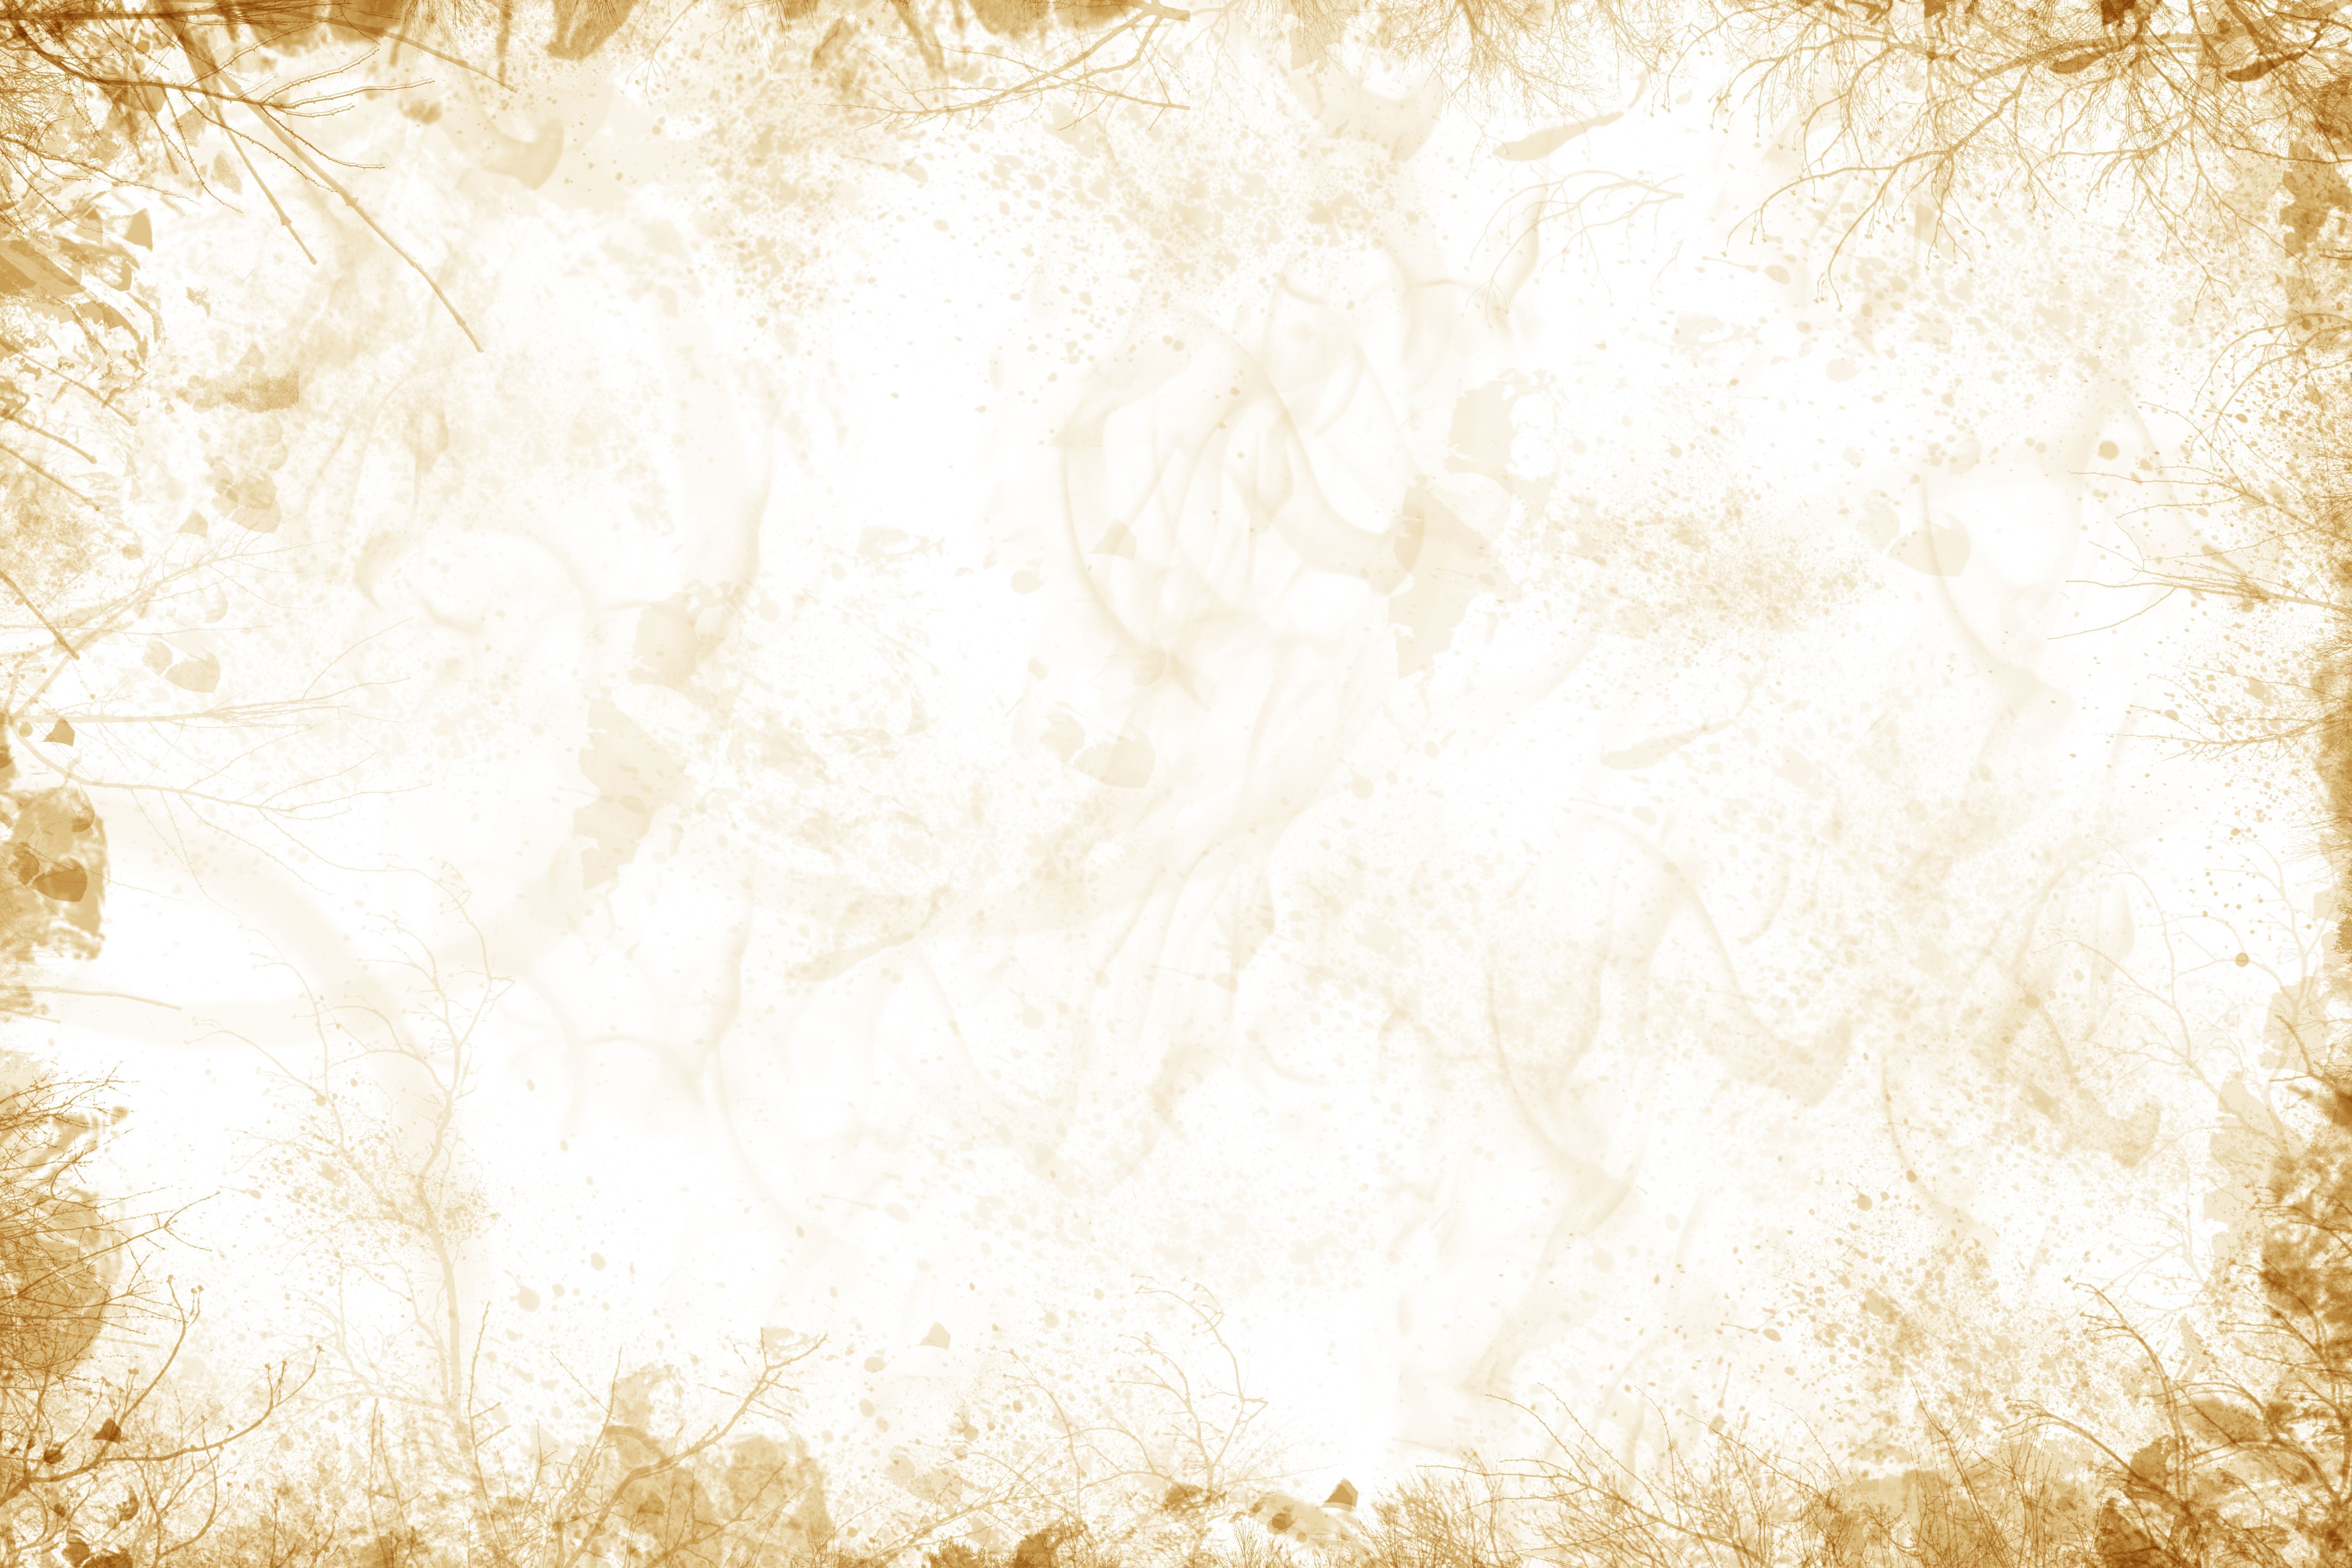 Texture Backgrounds - Funeral Prayer and Memorial Cards ...